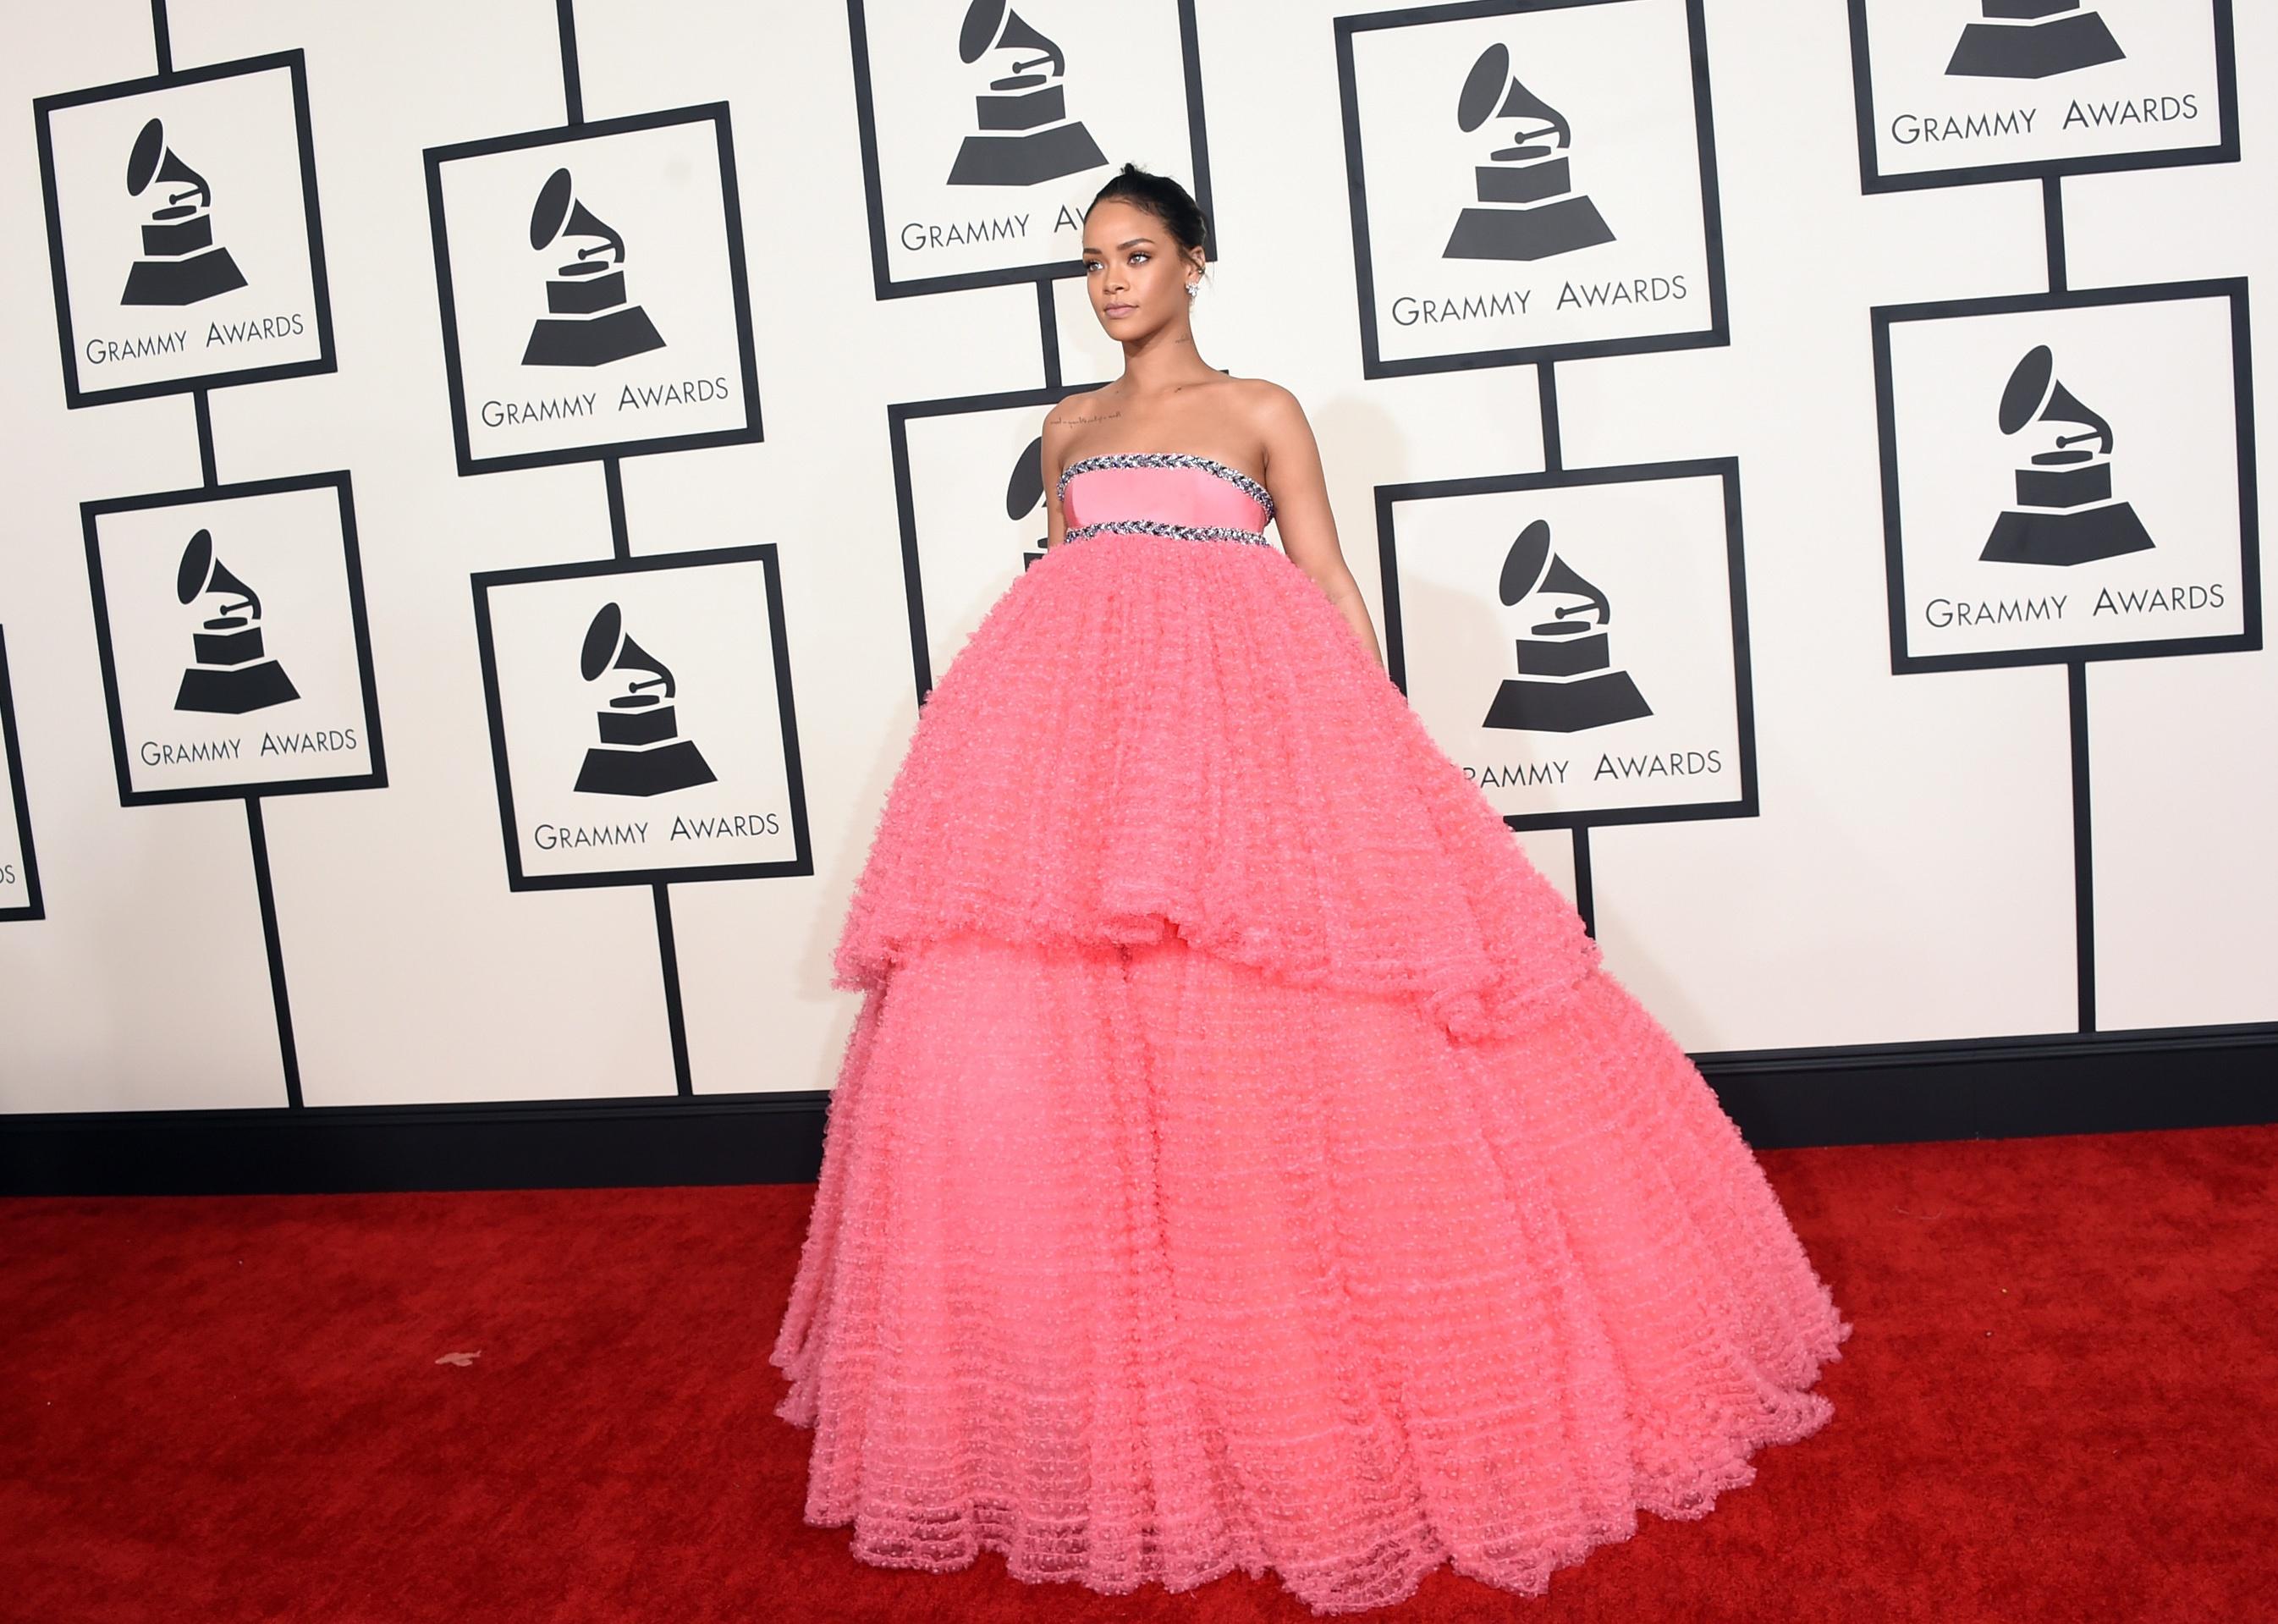 Rihanna in a bubble gum pink strapless gown with ruffles.